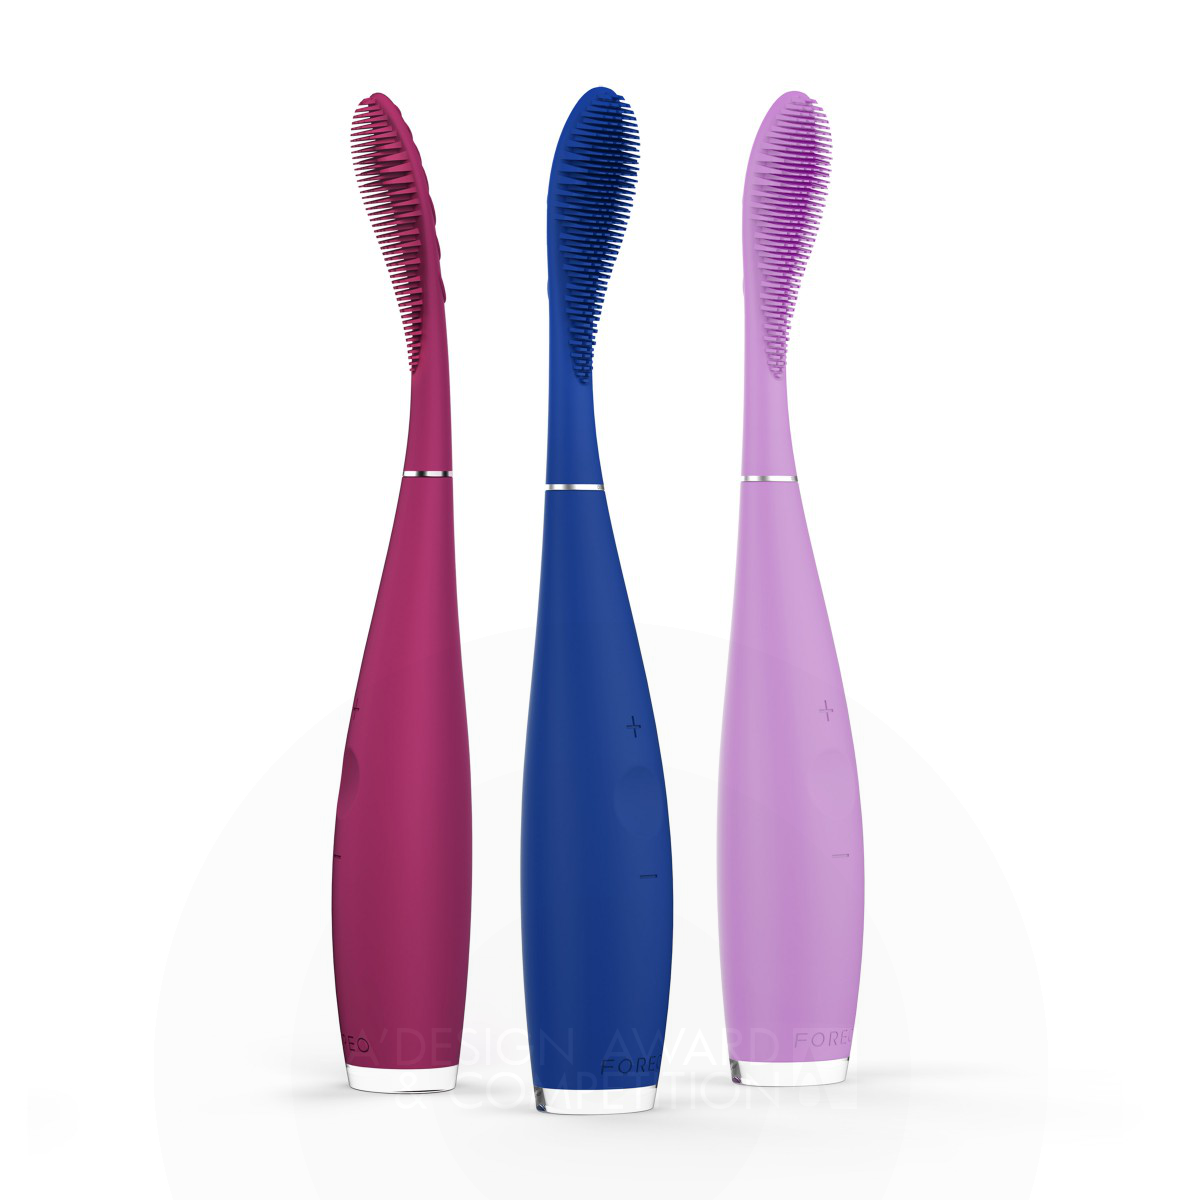 ISSA™ Electric Toothbrush by FOREO AB